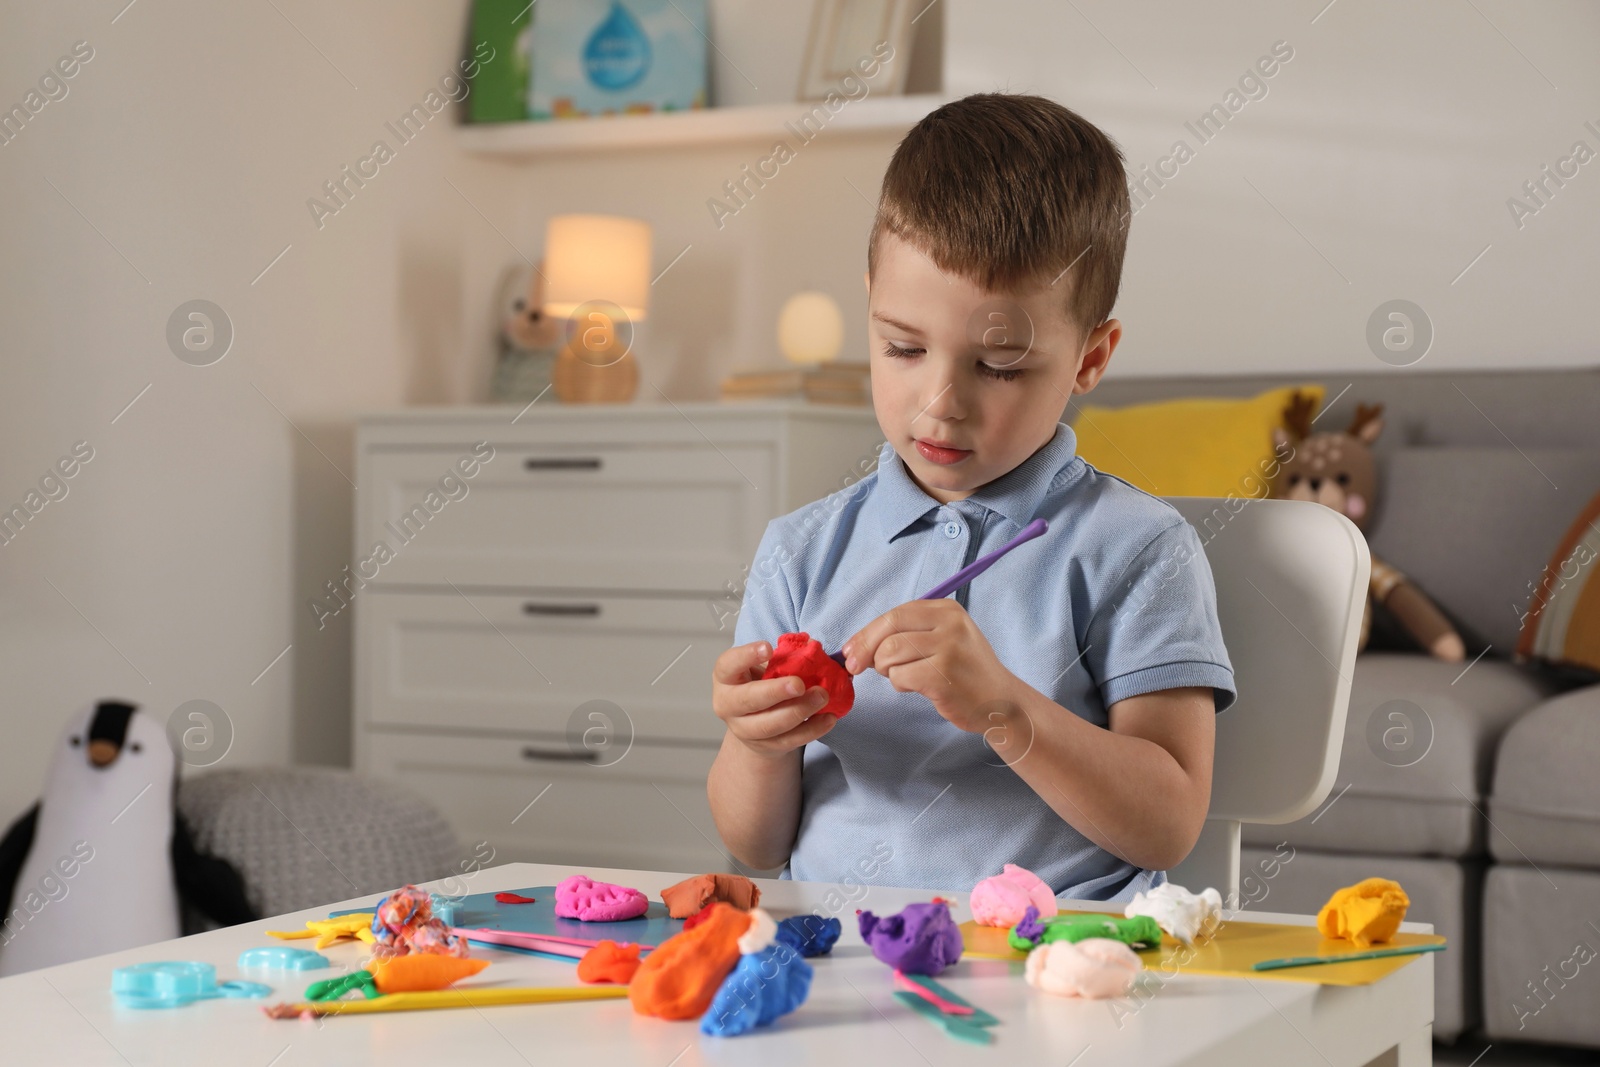 Photo of Little boy sculpting with play dough at table indoors